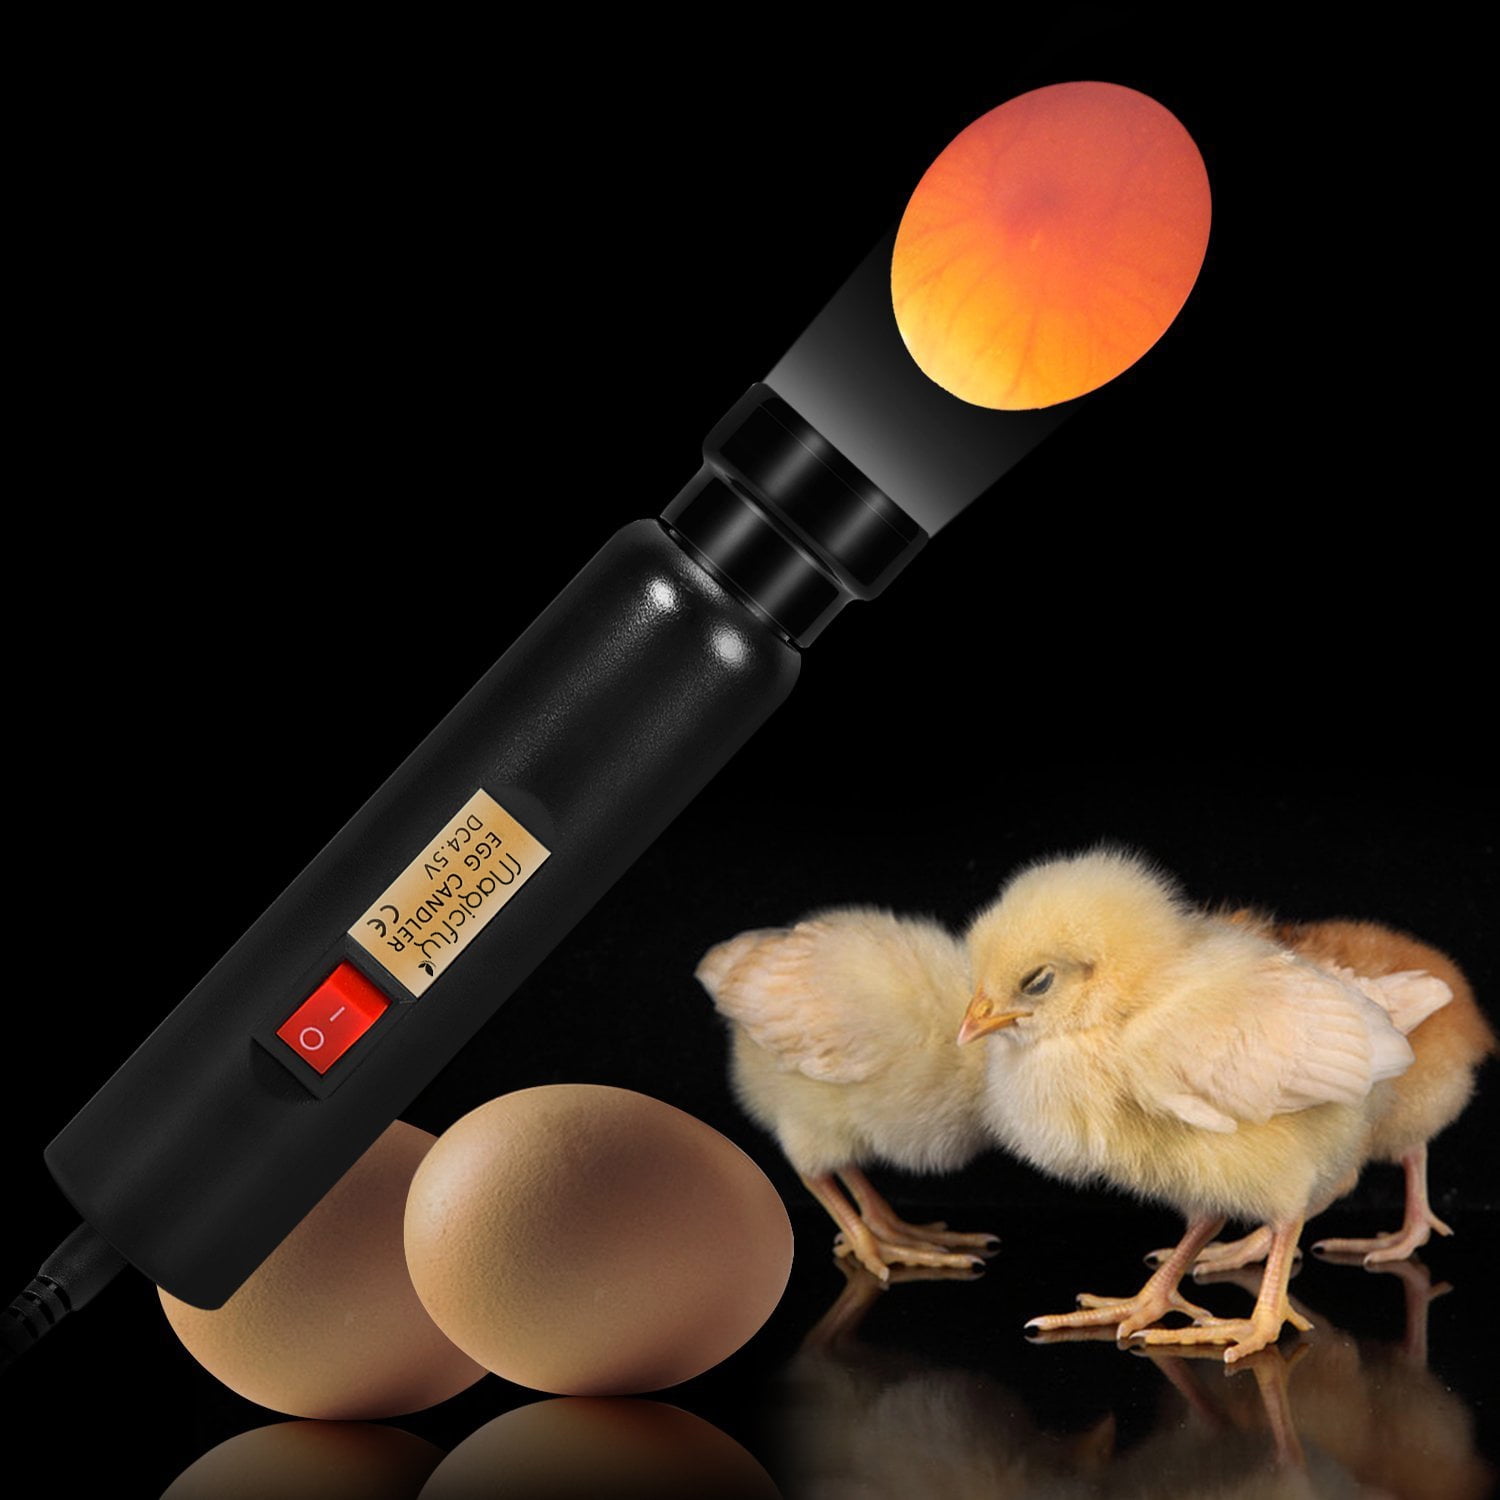  COOLTOP Rechargeable Egg Candler for Monitoring Eggs